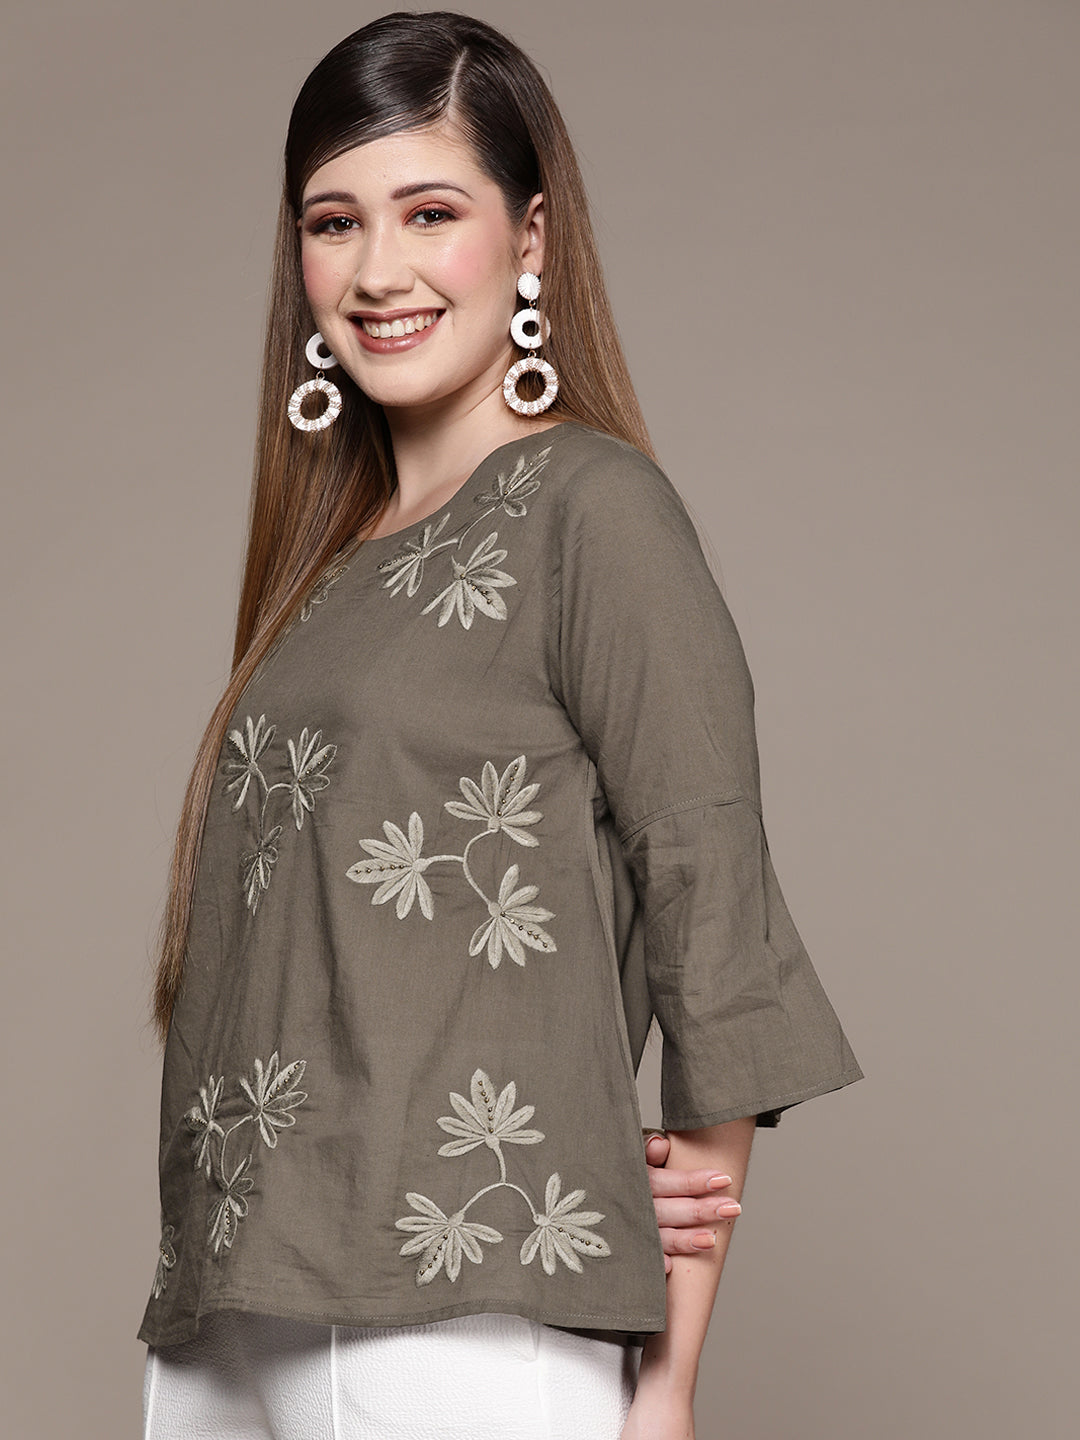 Ishin Women's Olive Embroidered A-Line Top